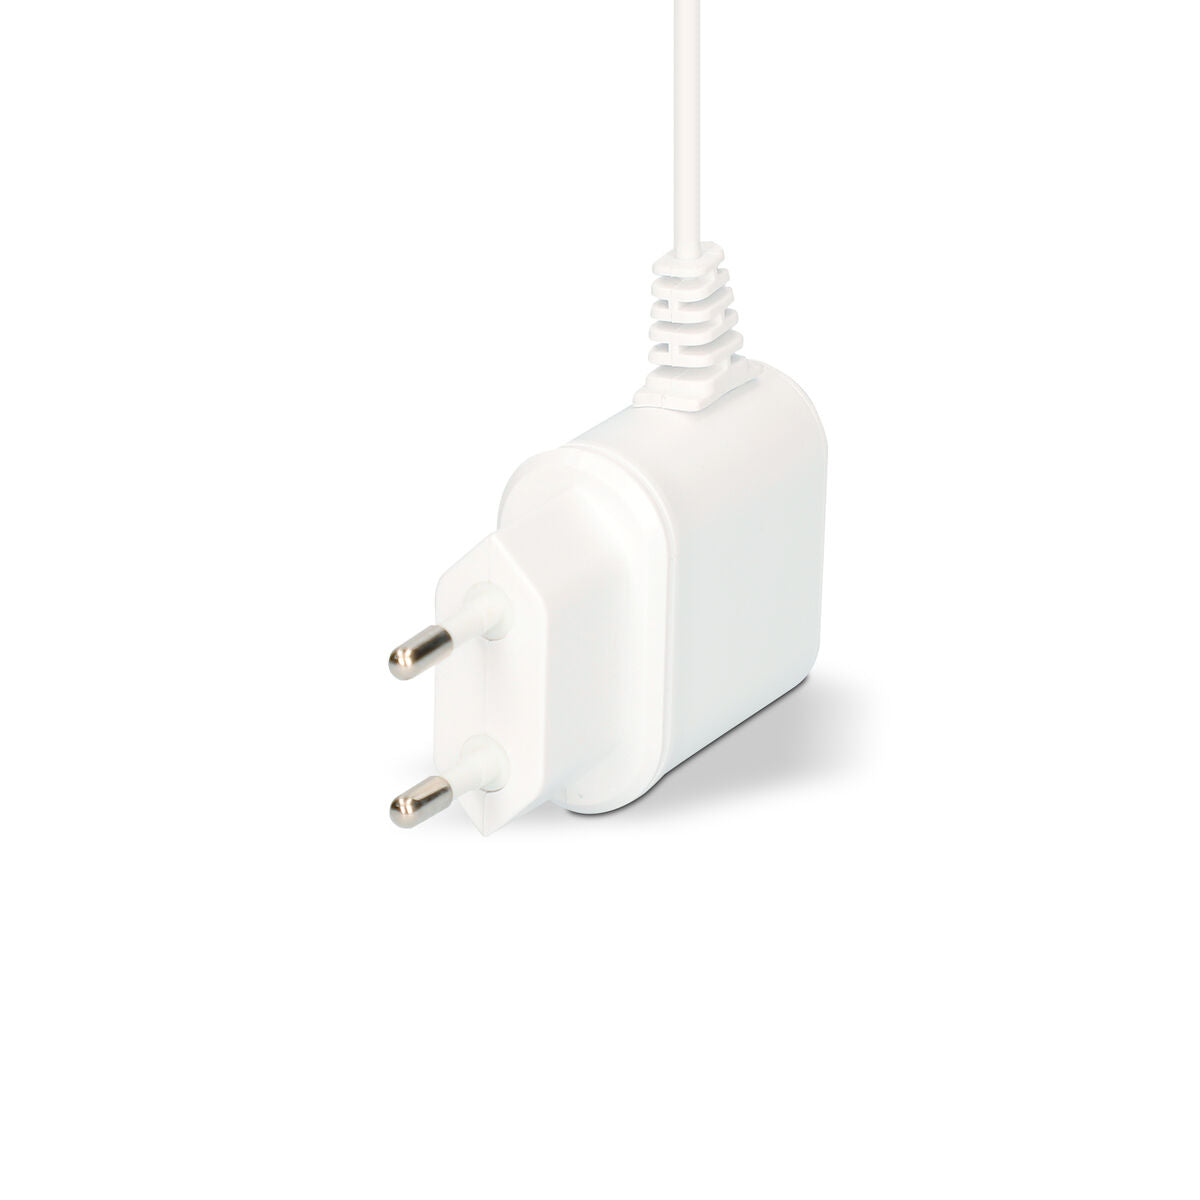 Wall Charger Lightning 1A Contact Apple-compatible iPhone